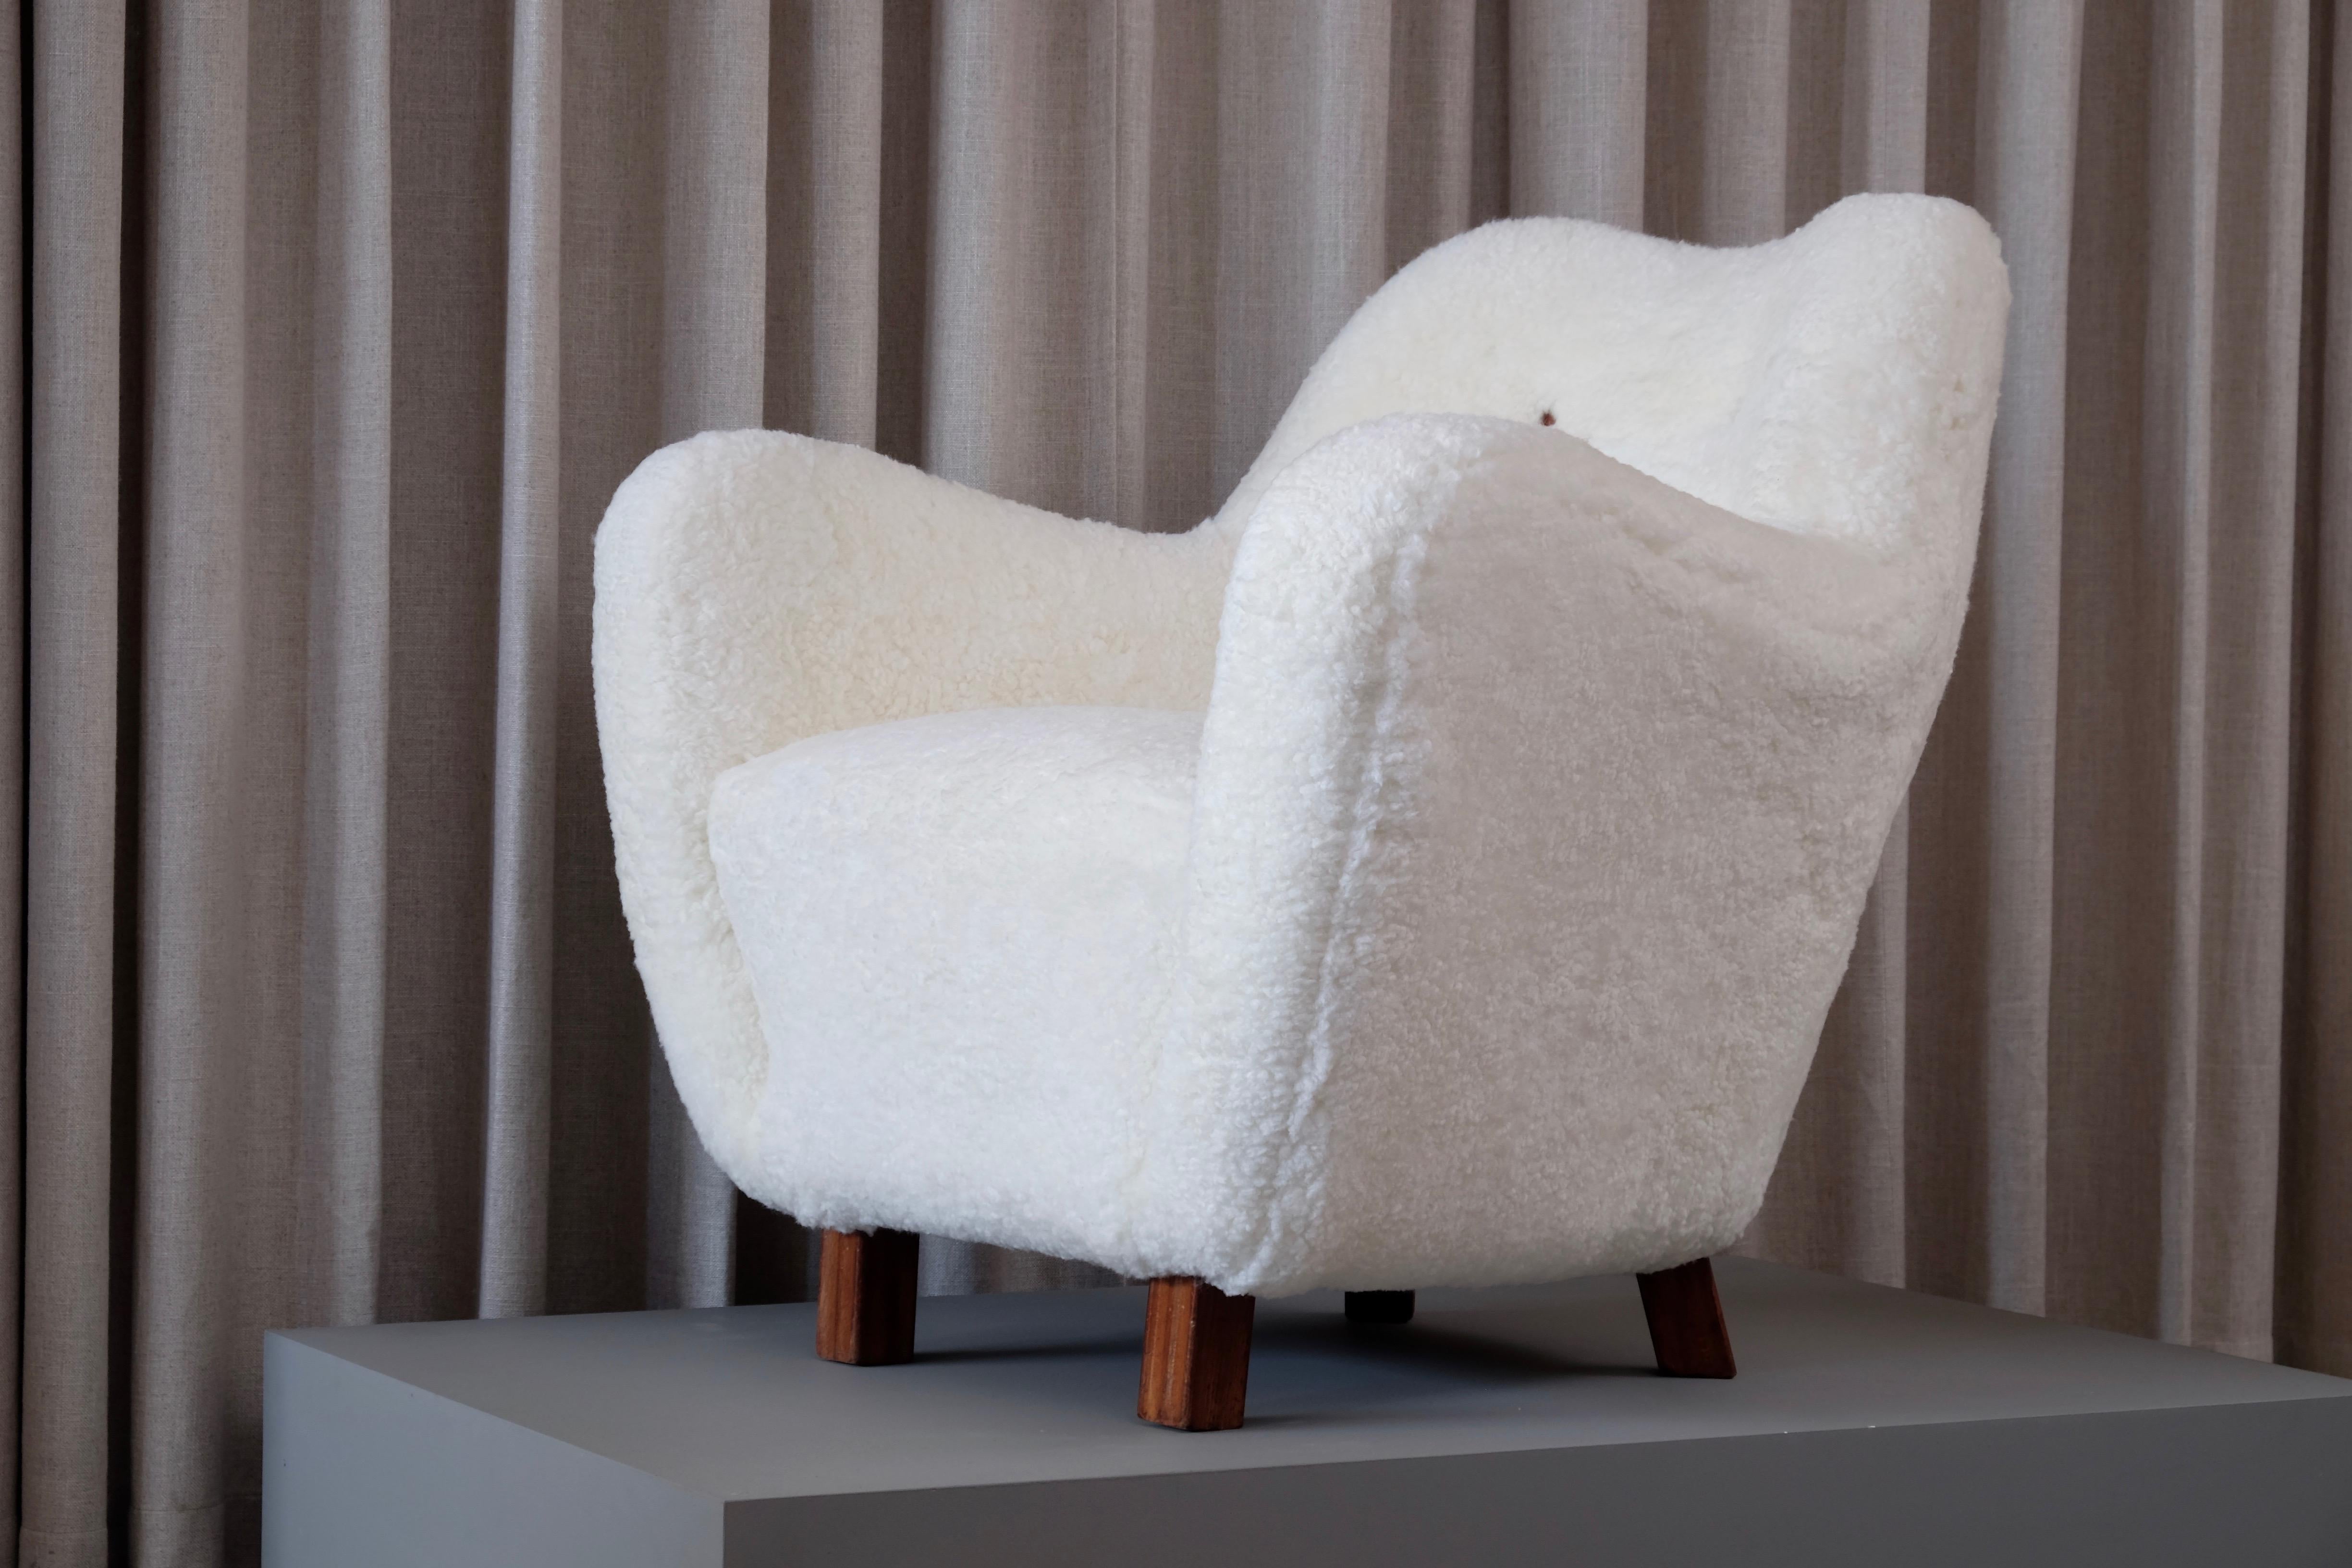 Reupholstred in white sheepskin, excellent condtition.
Produced by Sten Wicéns Möbelfabrik, Sweden, 1950s. 
         